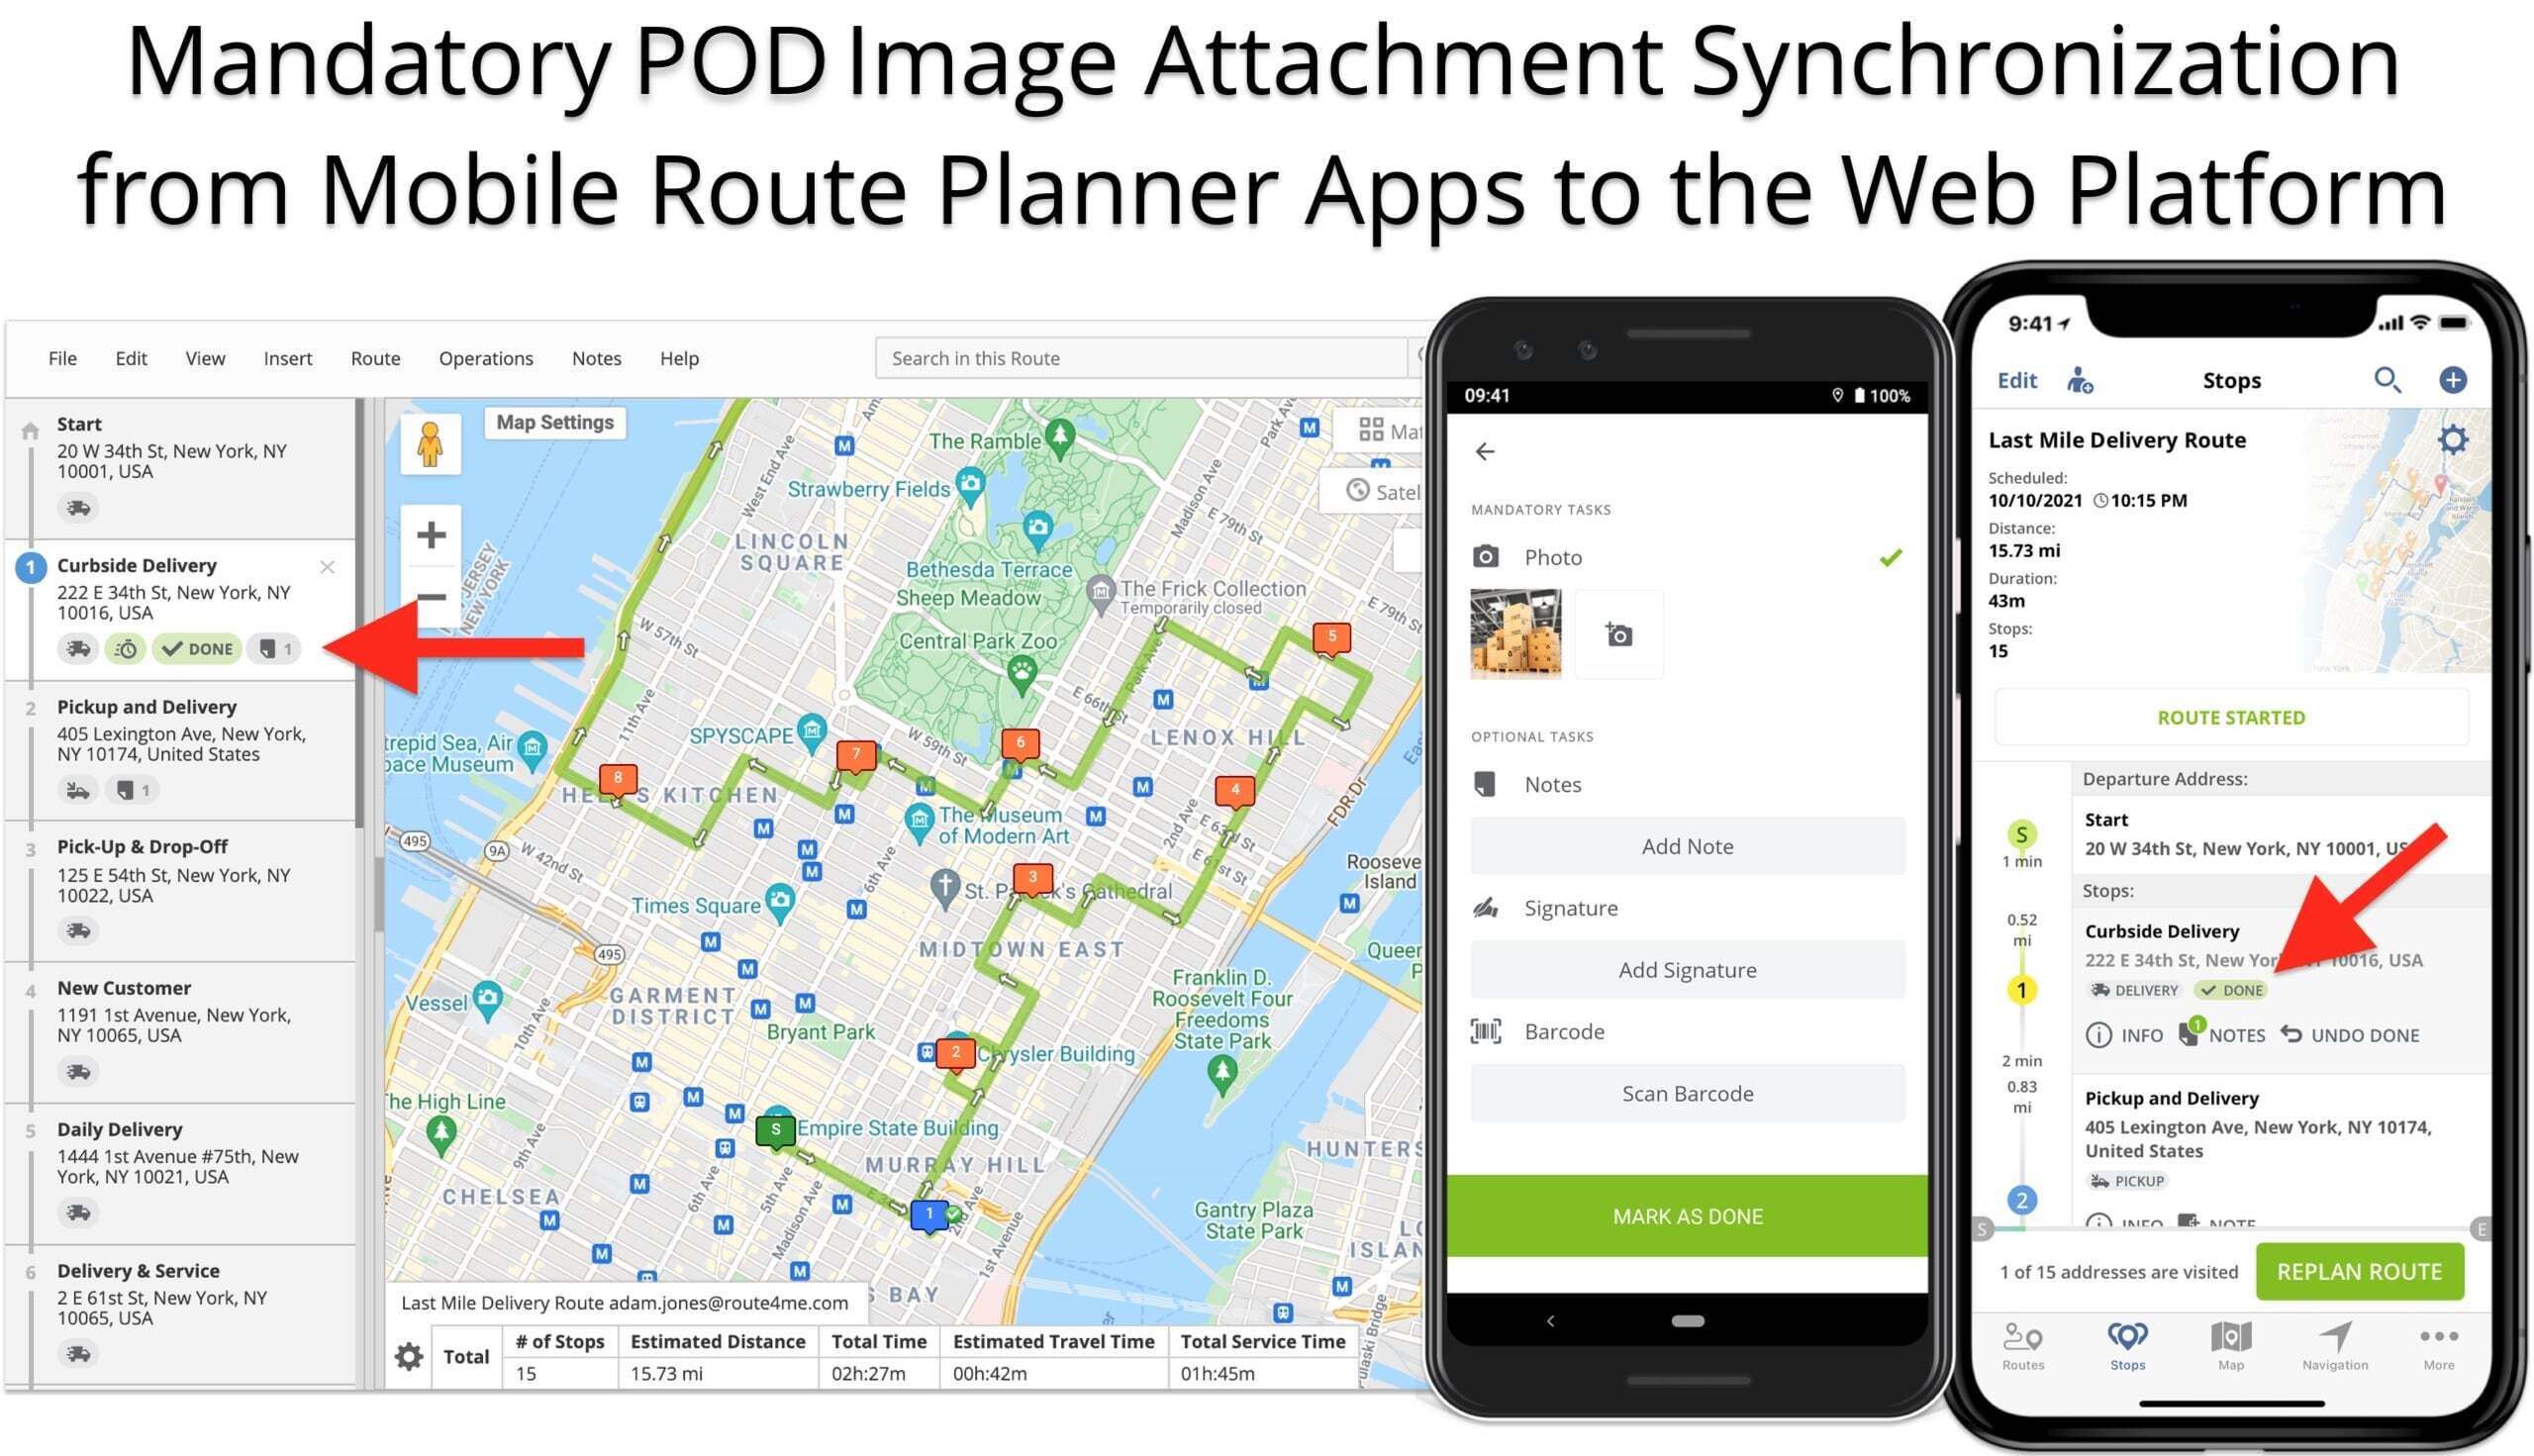 Synchronize mandatory image attachments in real-time from mobile route planner apps to the Web.